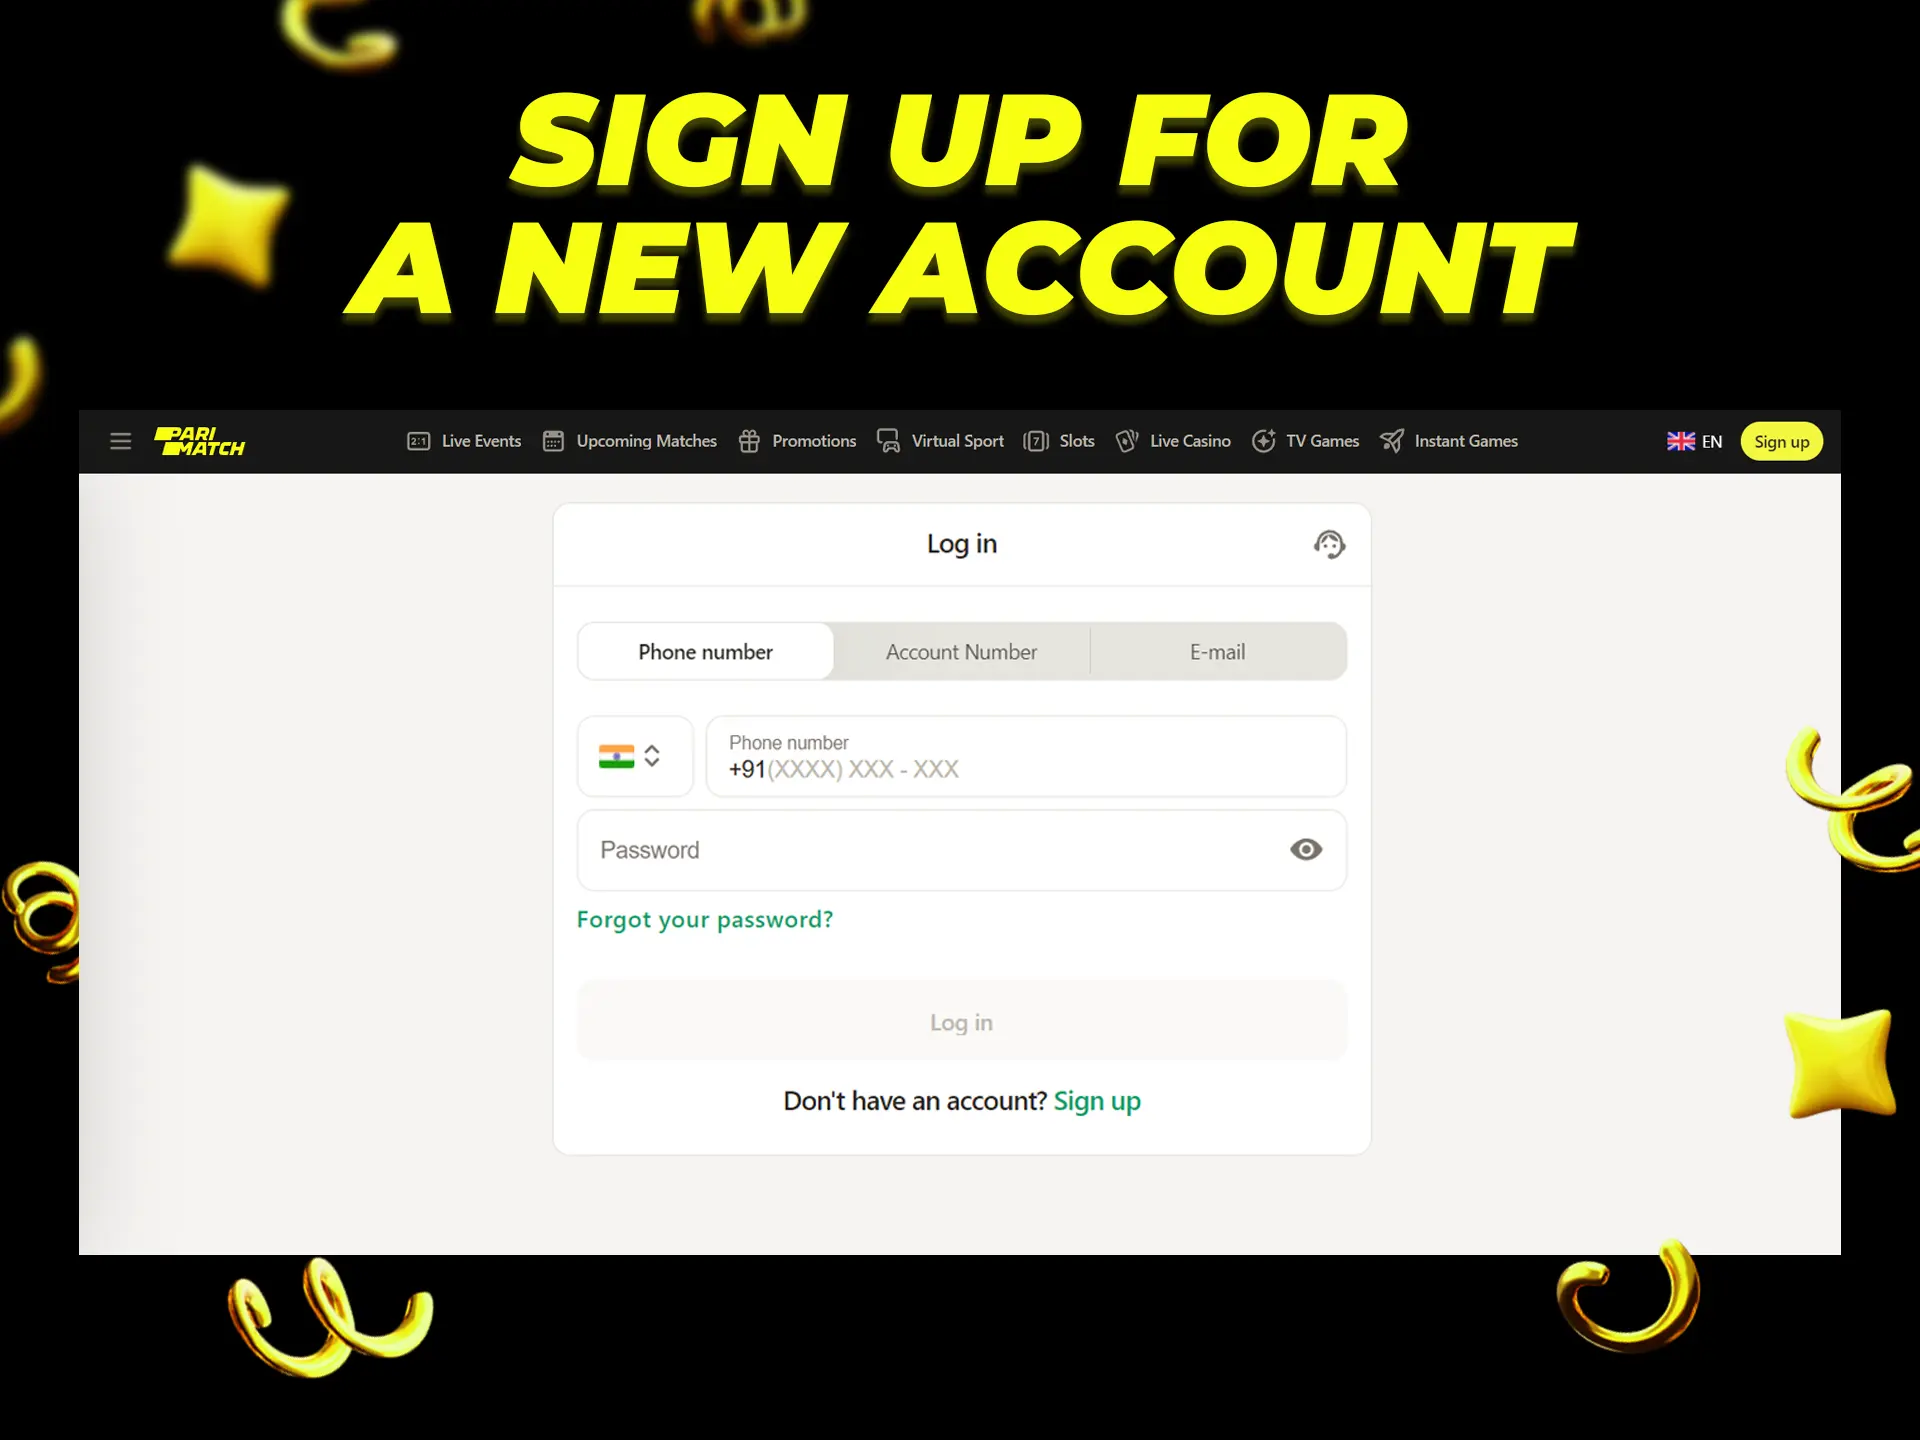 Click the register button to create your account.